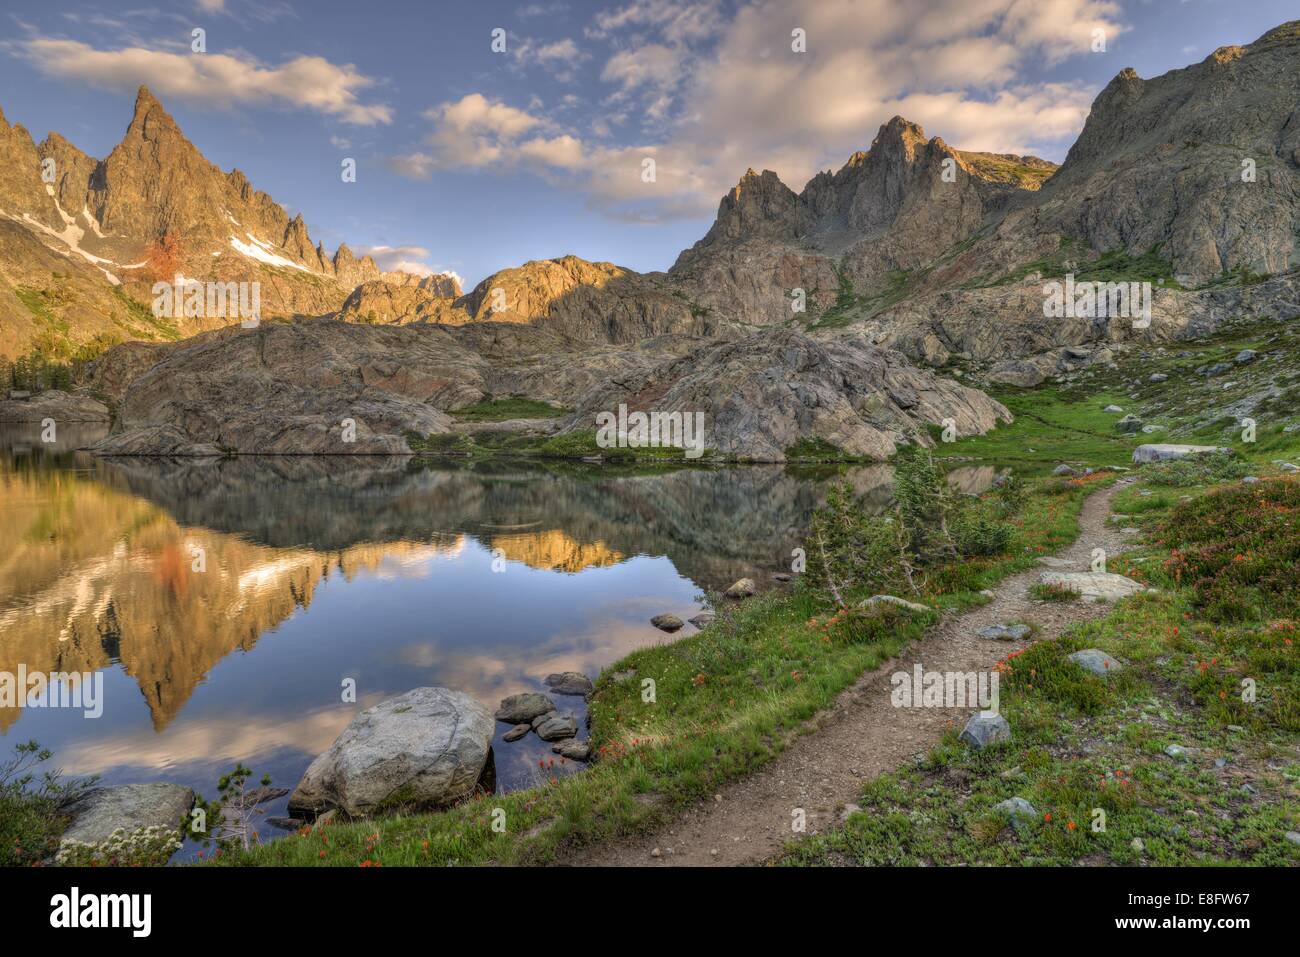 USA, California, Inyo National Forest, Path to Mountains Stock Photo